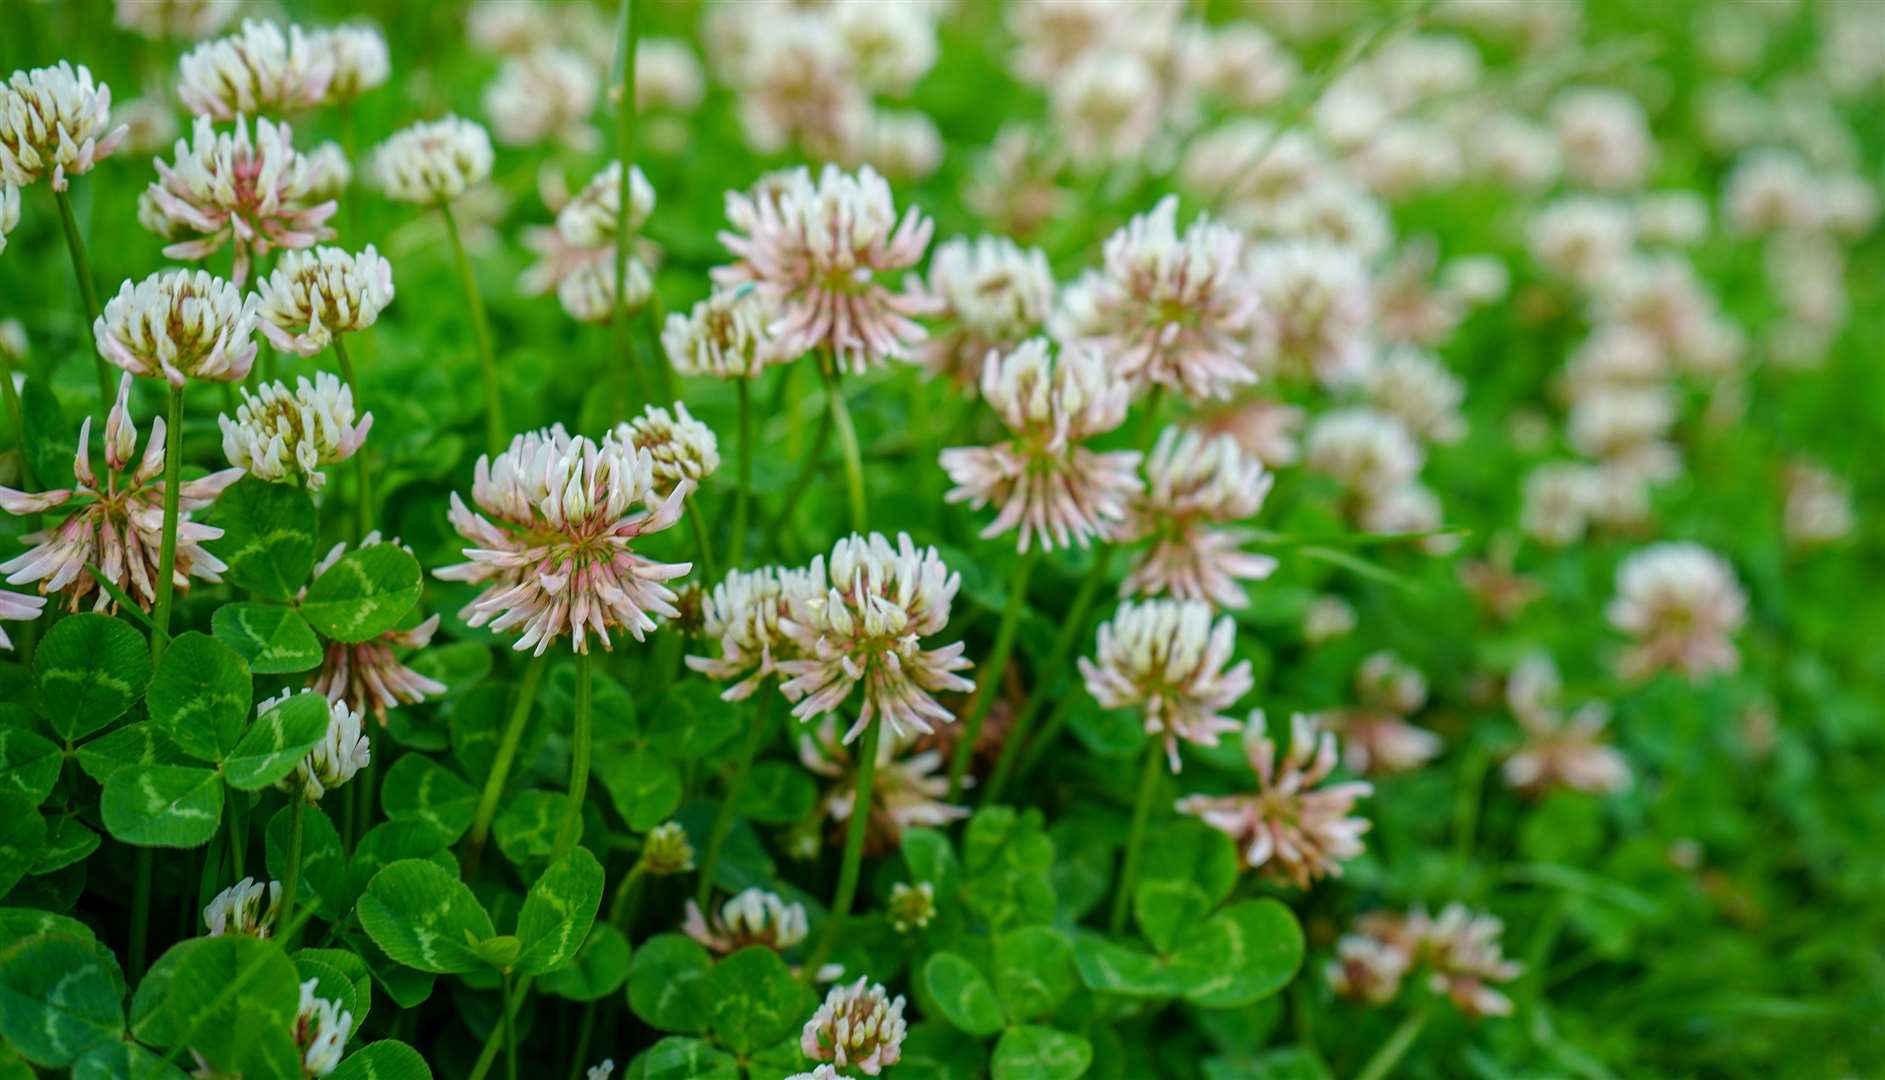 Go for a natural look with a clover lawn. Picture: iStock/PA